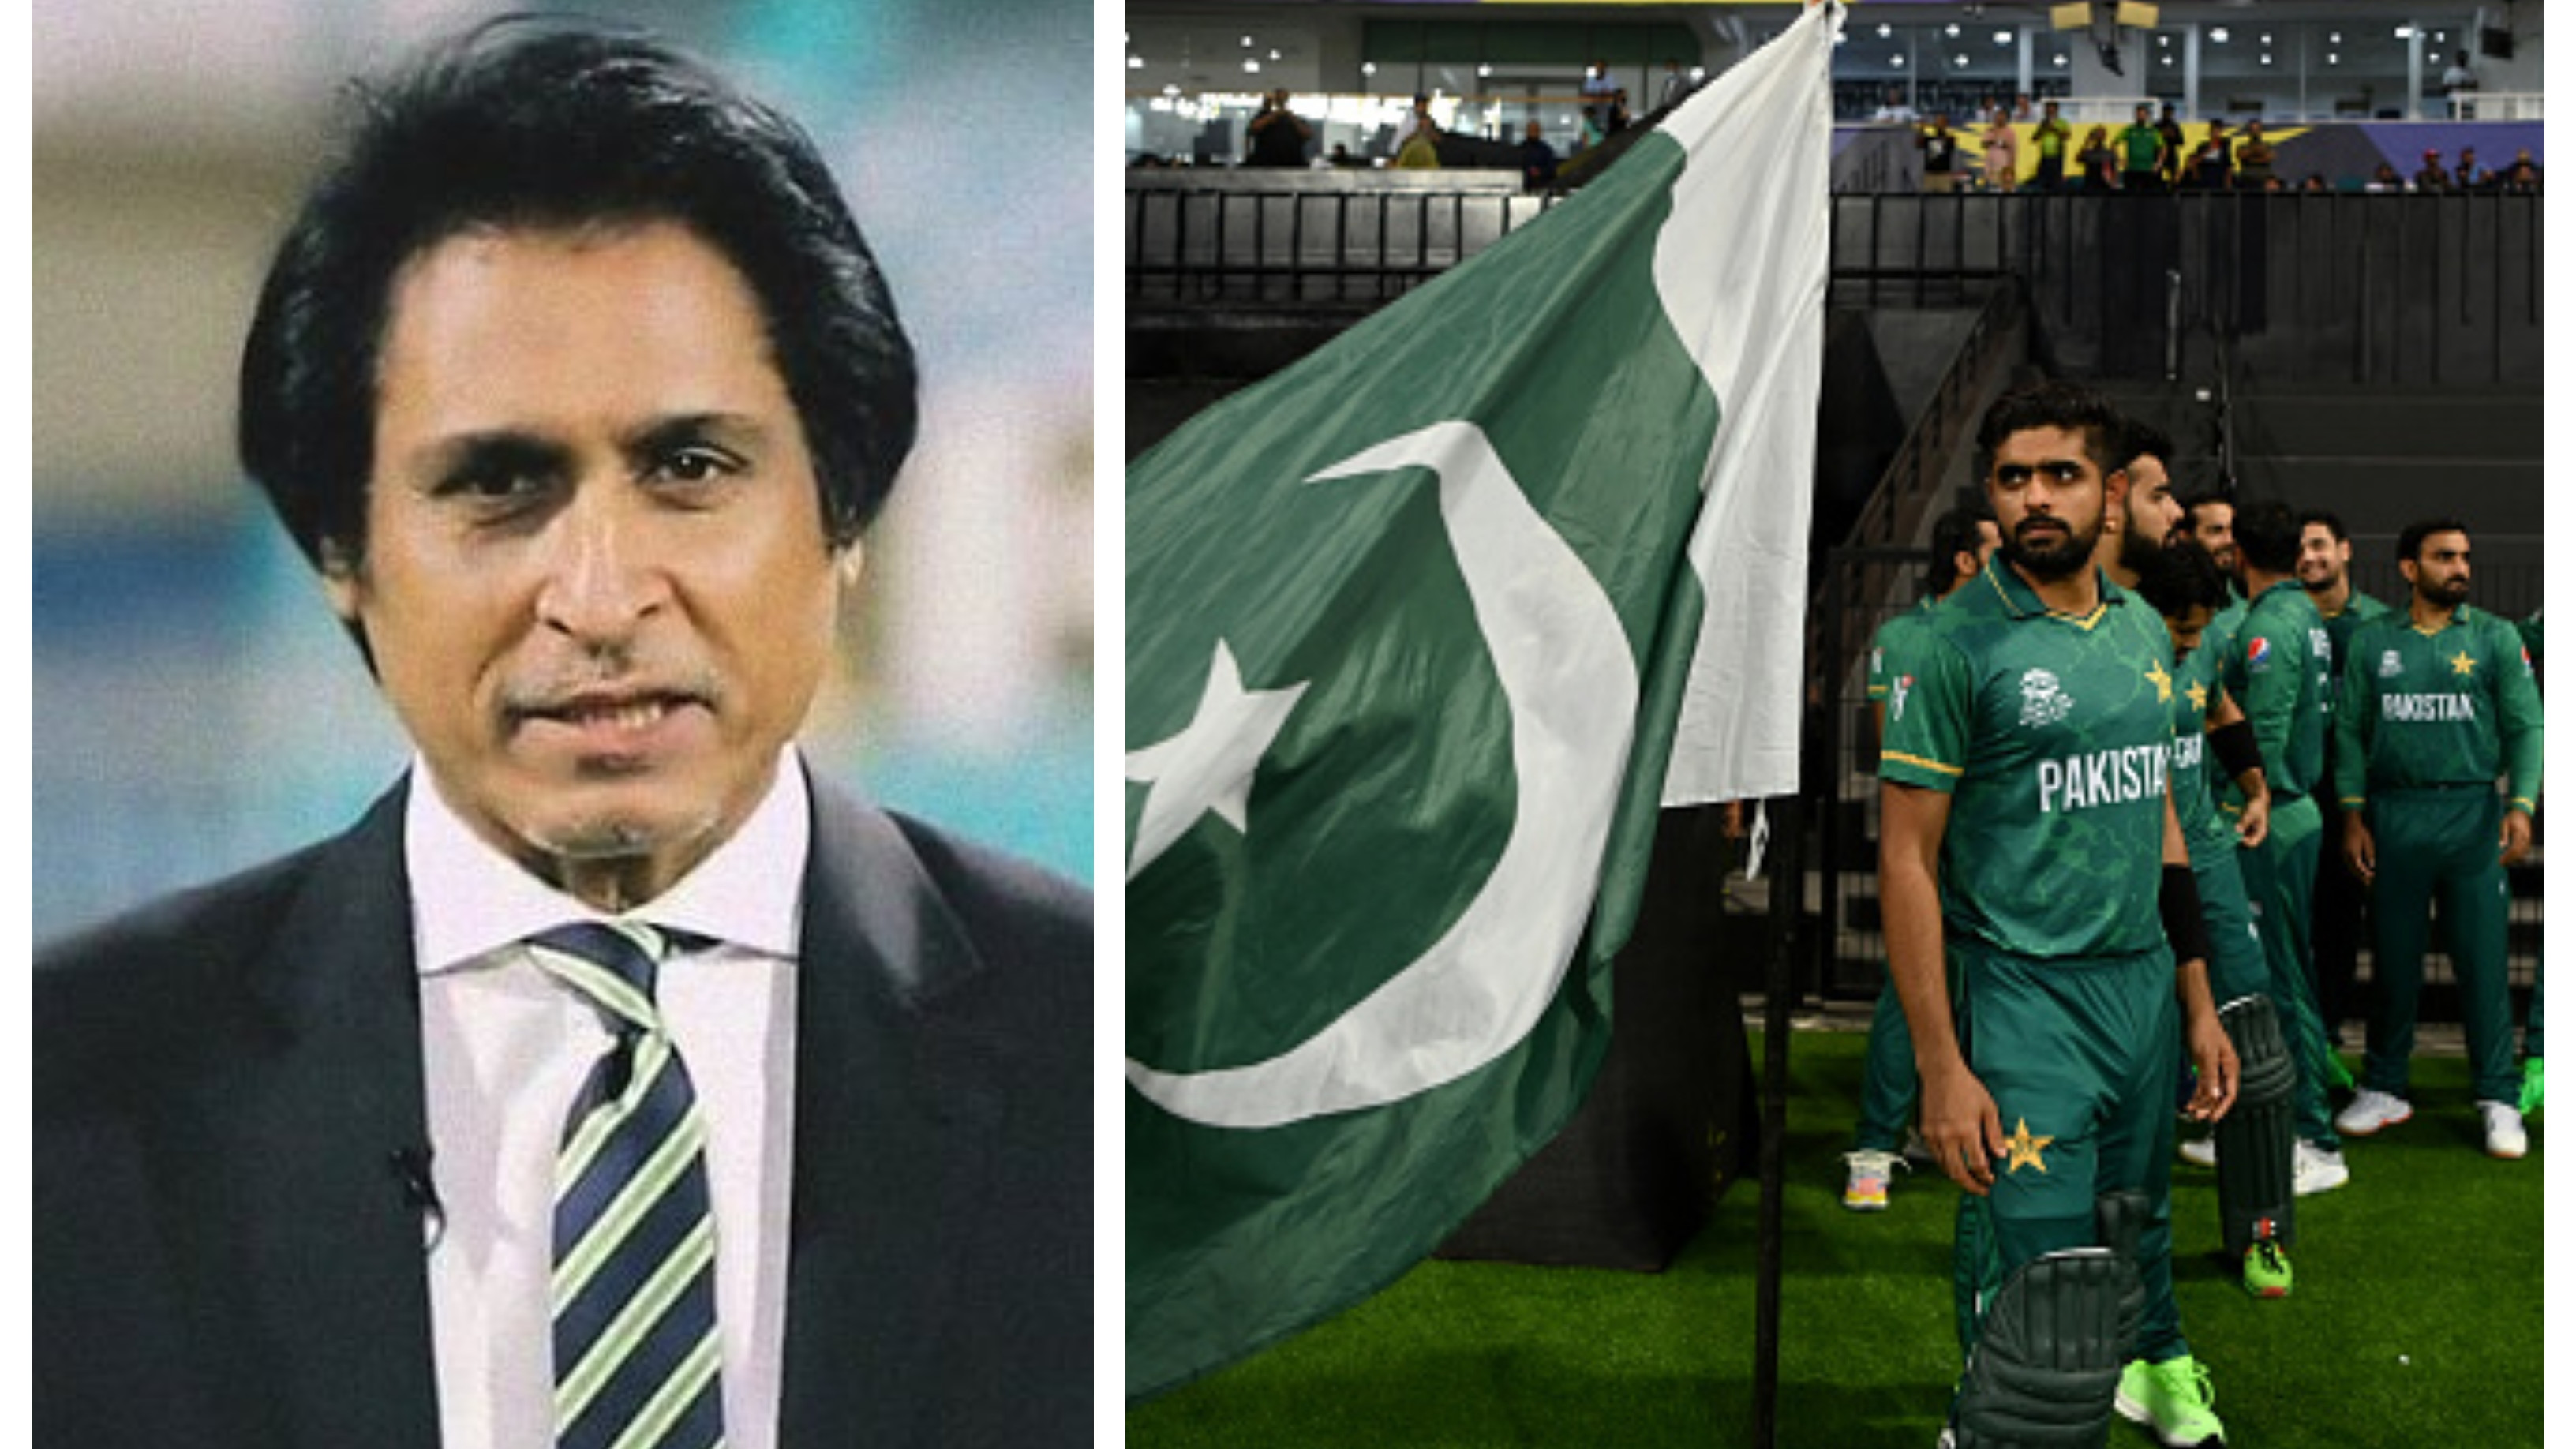 T20 World Cup 2021: “Don’t think Babar Azam needs to do anything differently”, Ramiz Raja ahead of 2nd semi-final